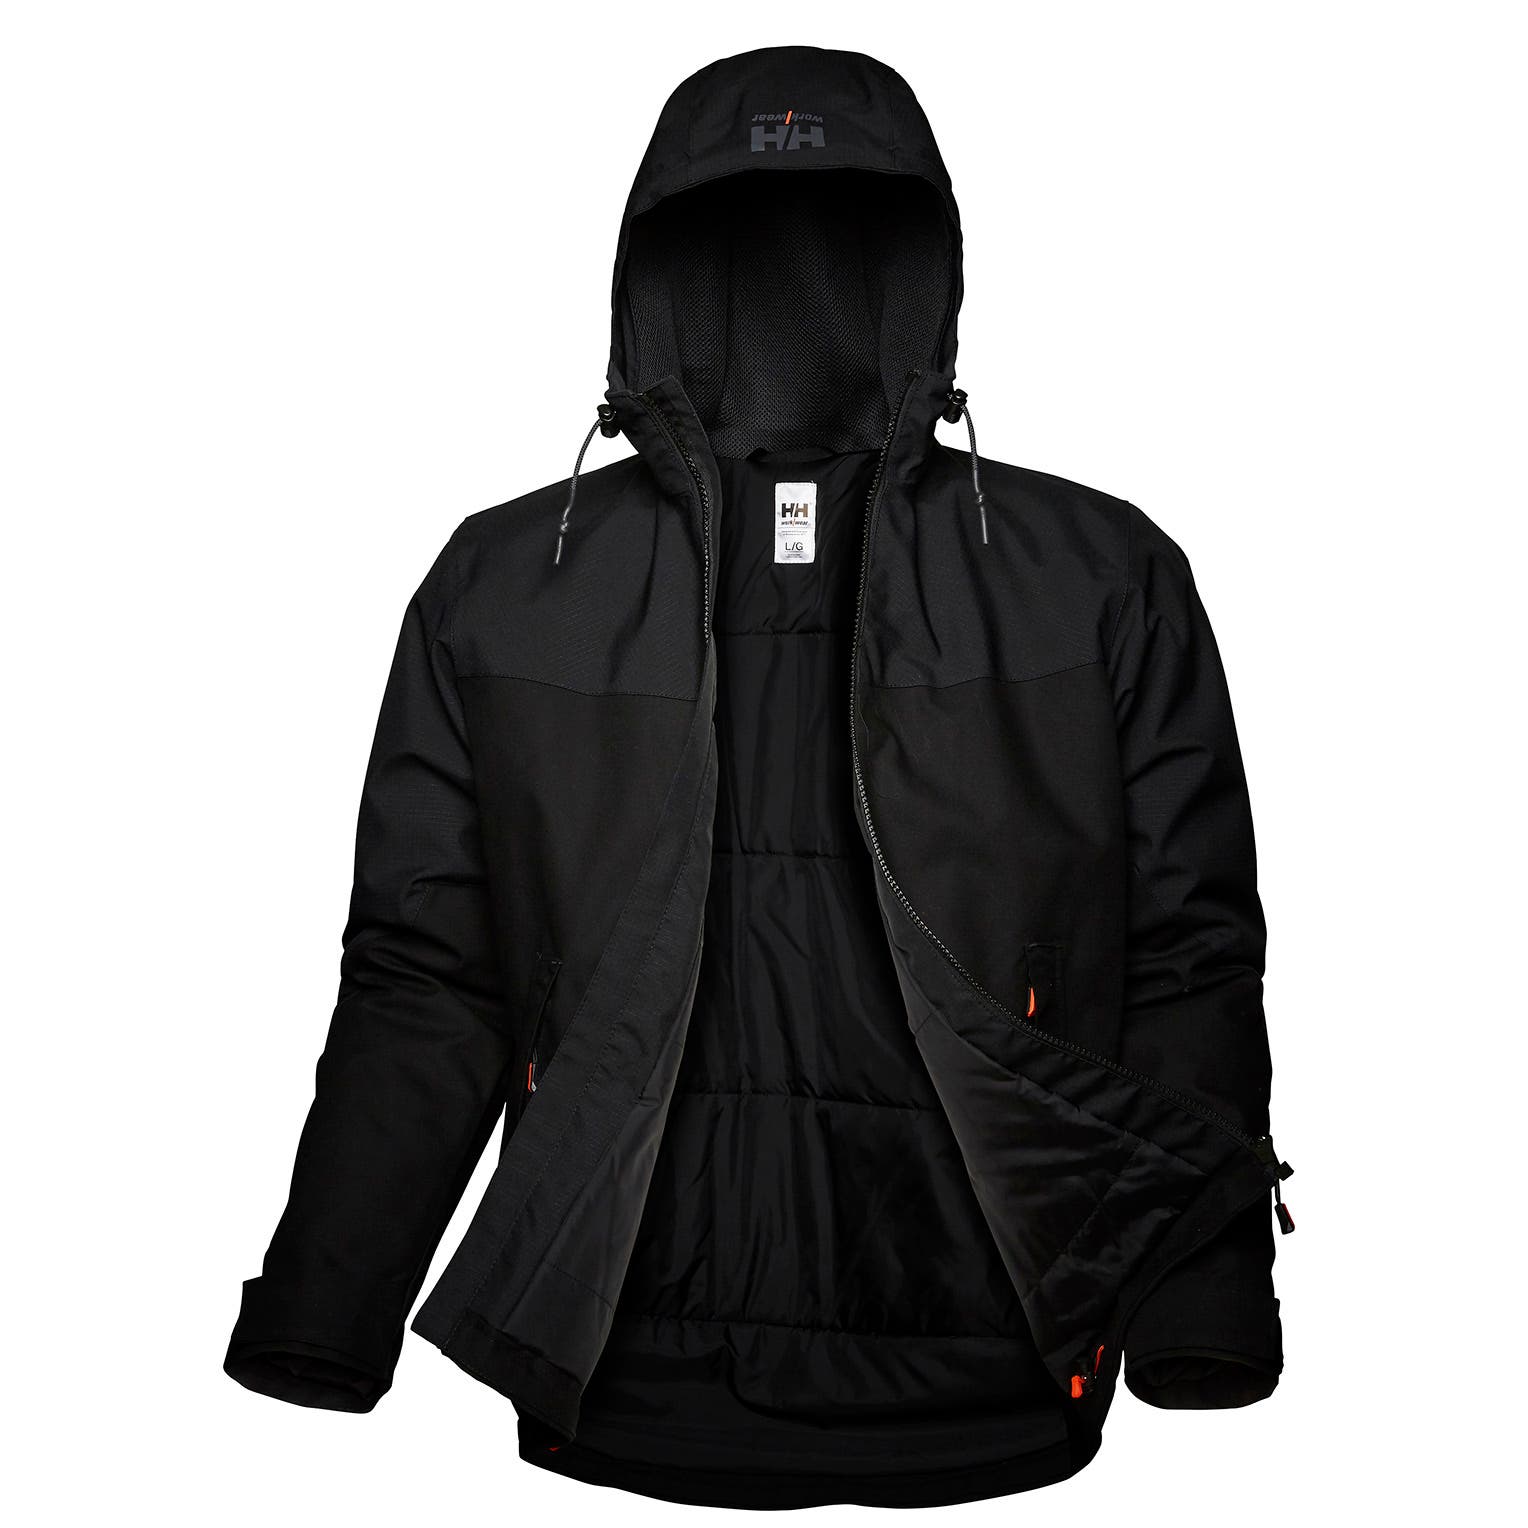 Helly Hansen Men's Oxford Winter Jacket in Black from the front